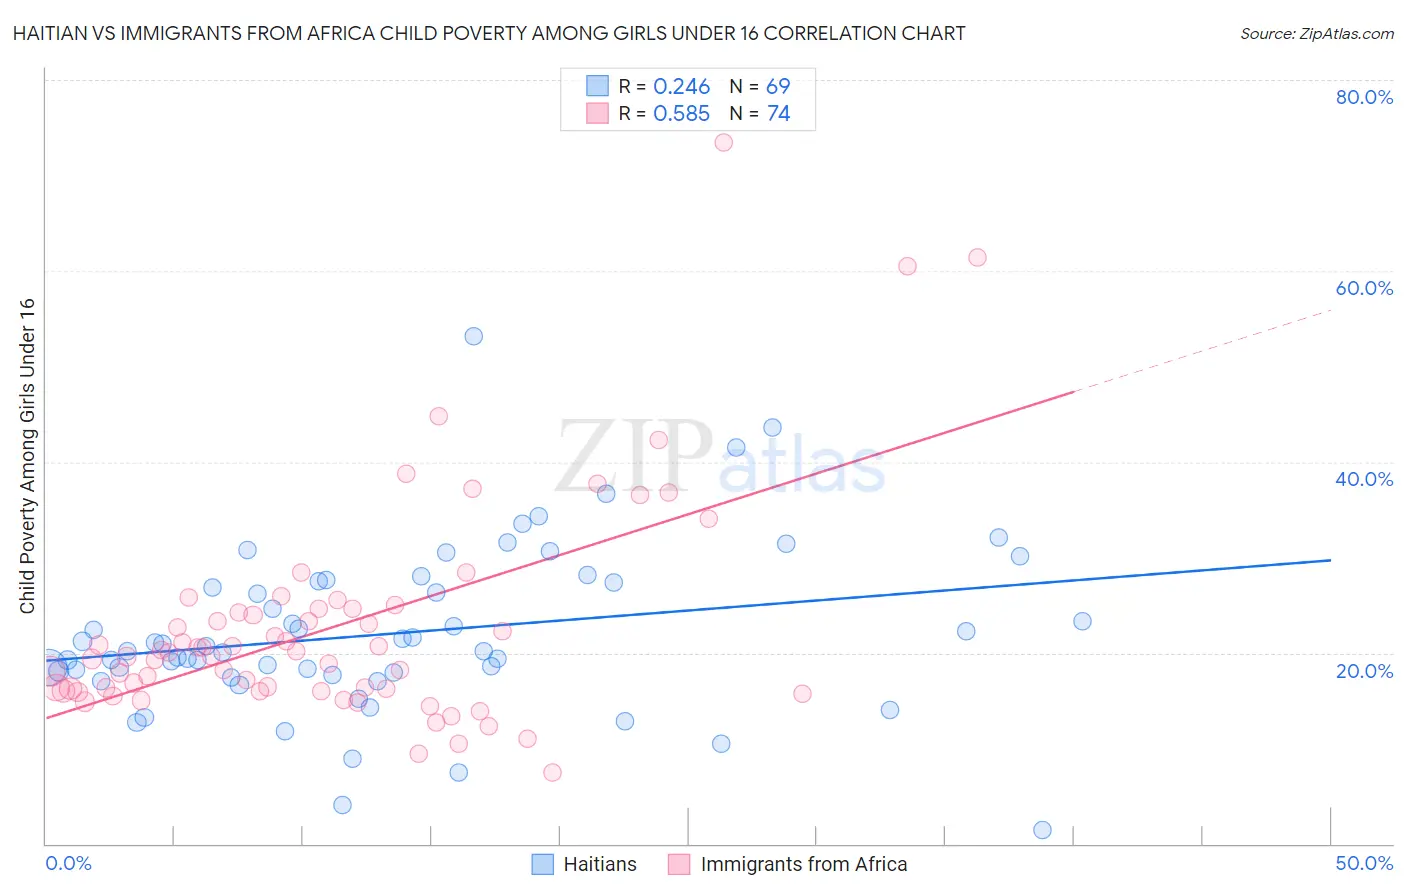 Haitian vs Immigrants from Africa Child Poverty Among Girls Under 16